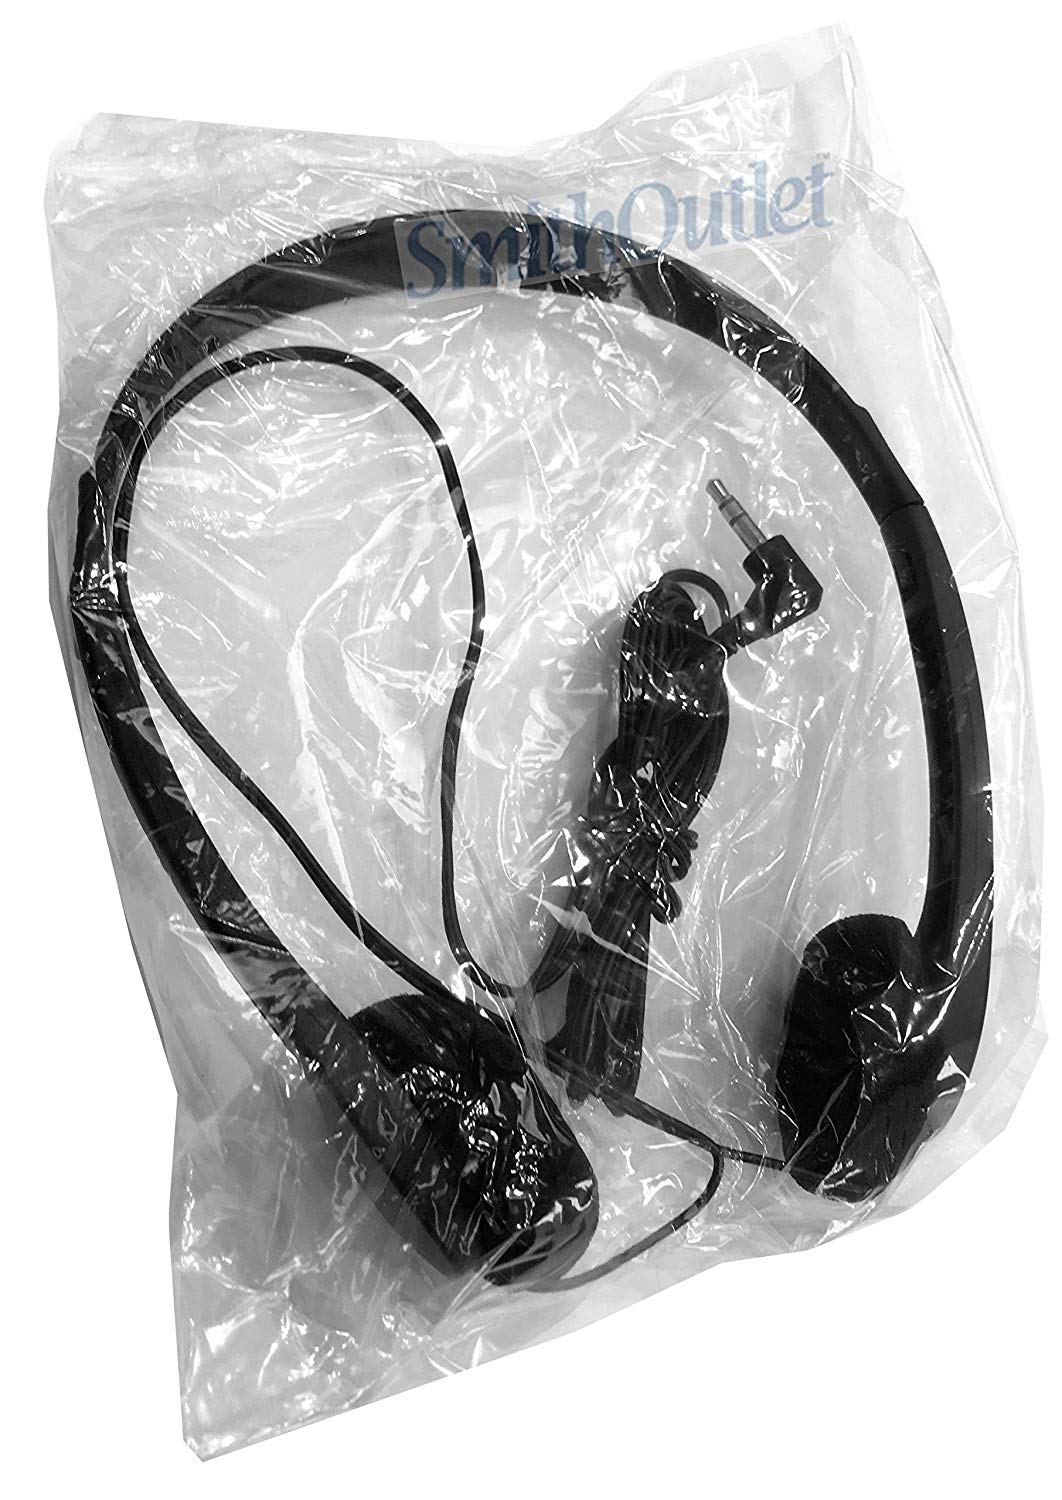  Each Headphone Individually Packaged and Sealed